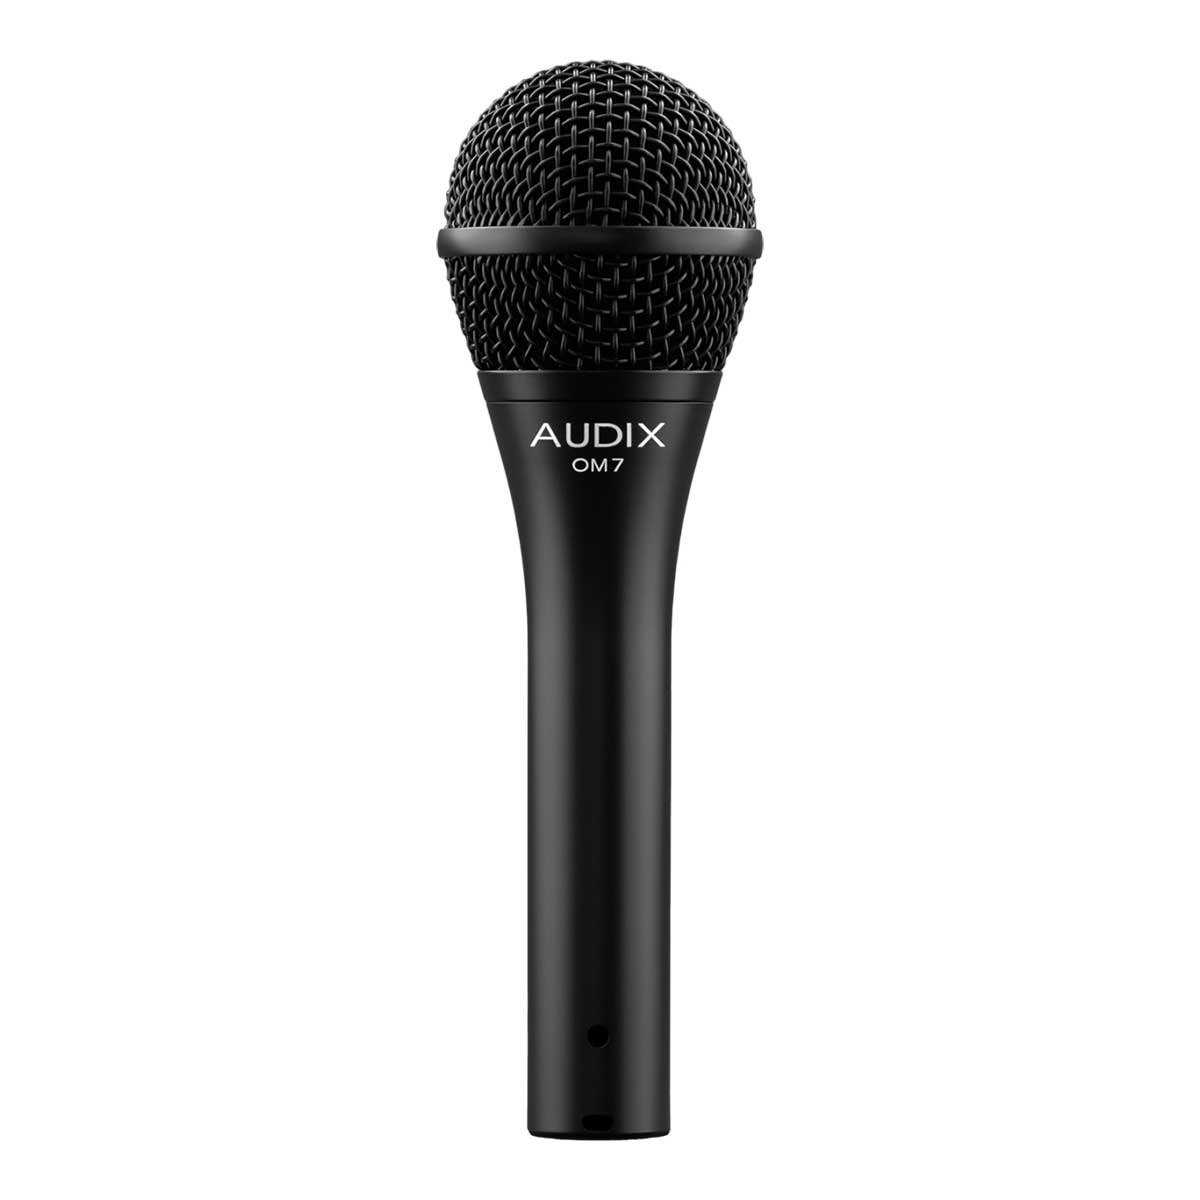 Audix ADX-OM7 Professional Dynamic Vocal Microphone